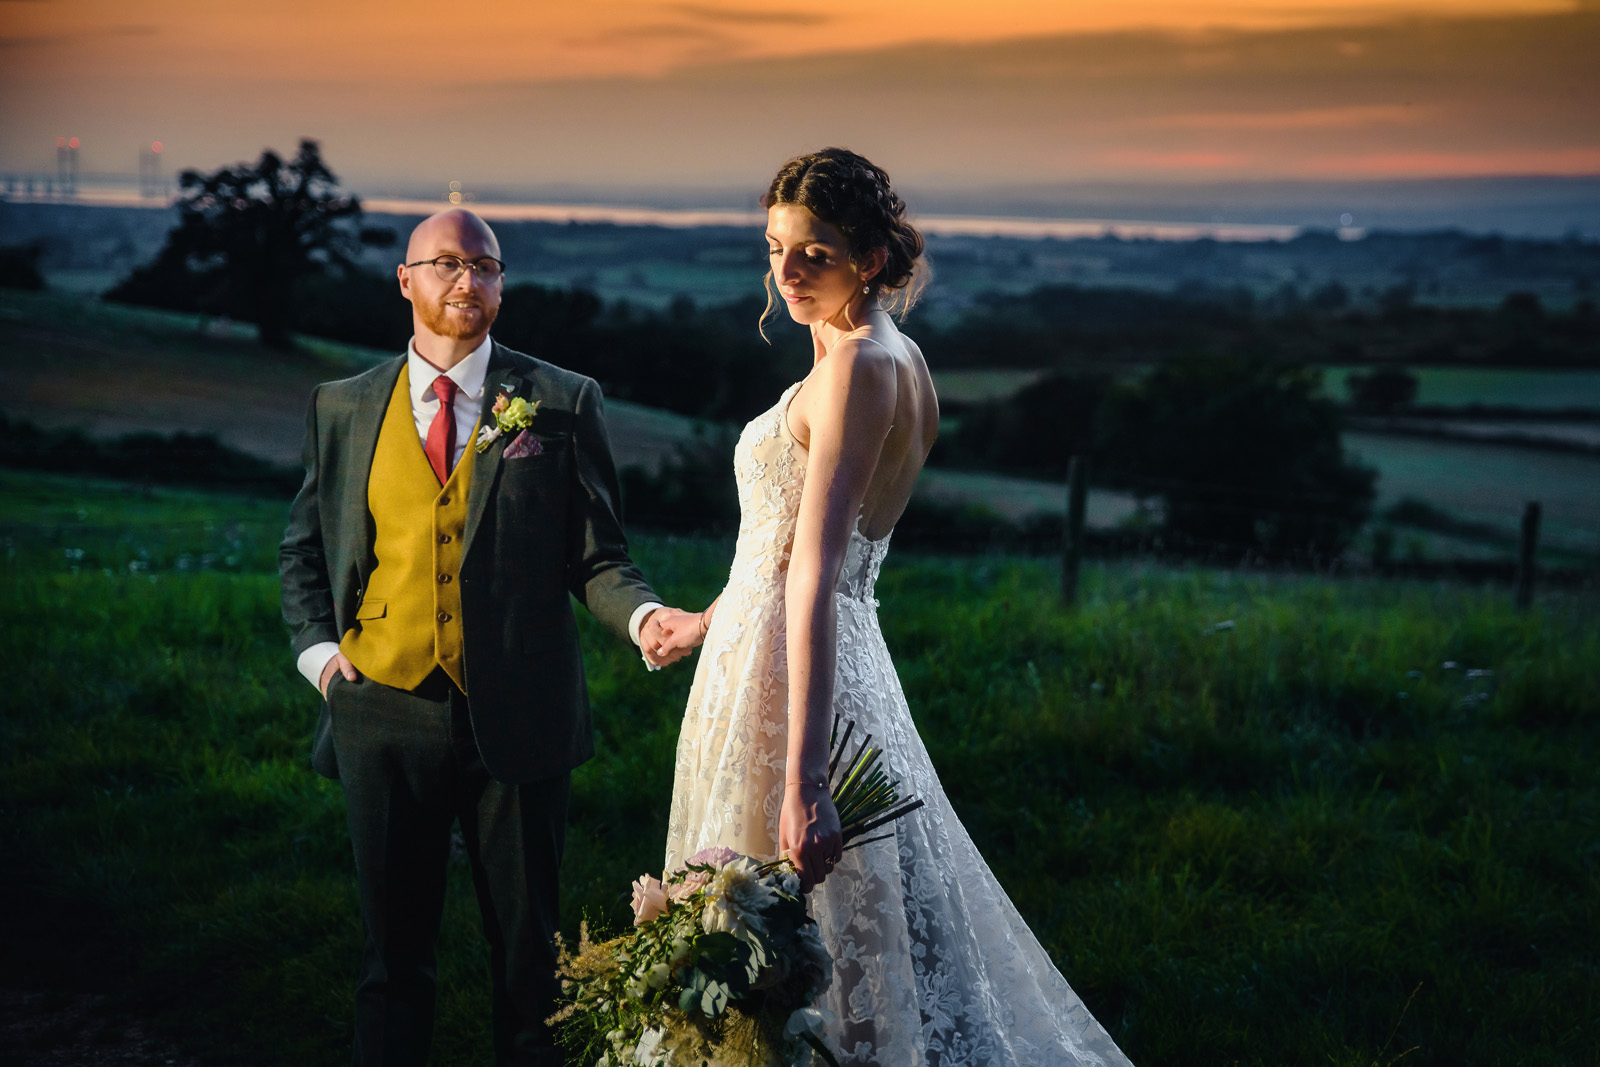 Creative Bride & Groom wedding photography at the barn old down estate